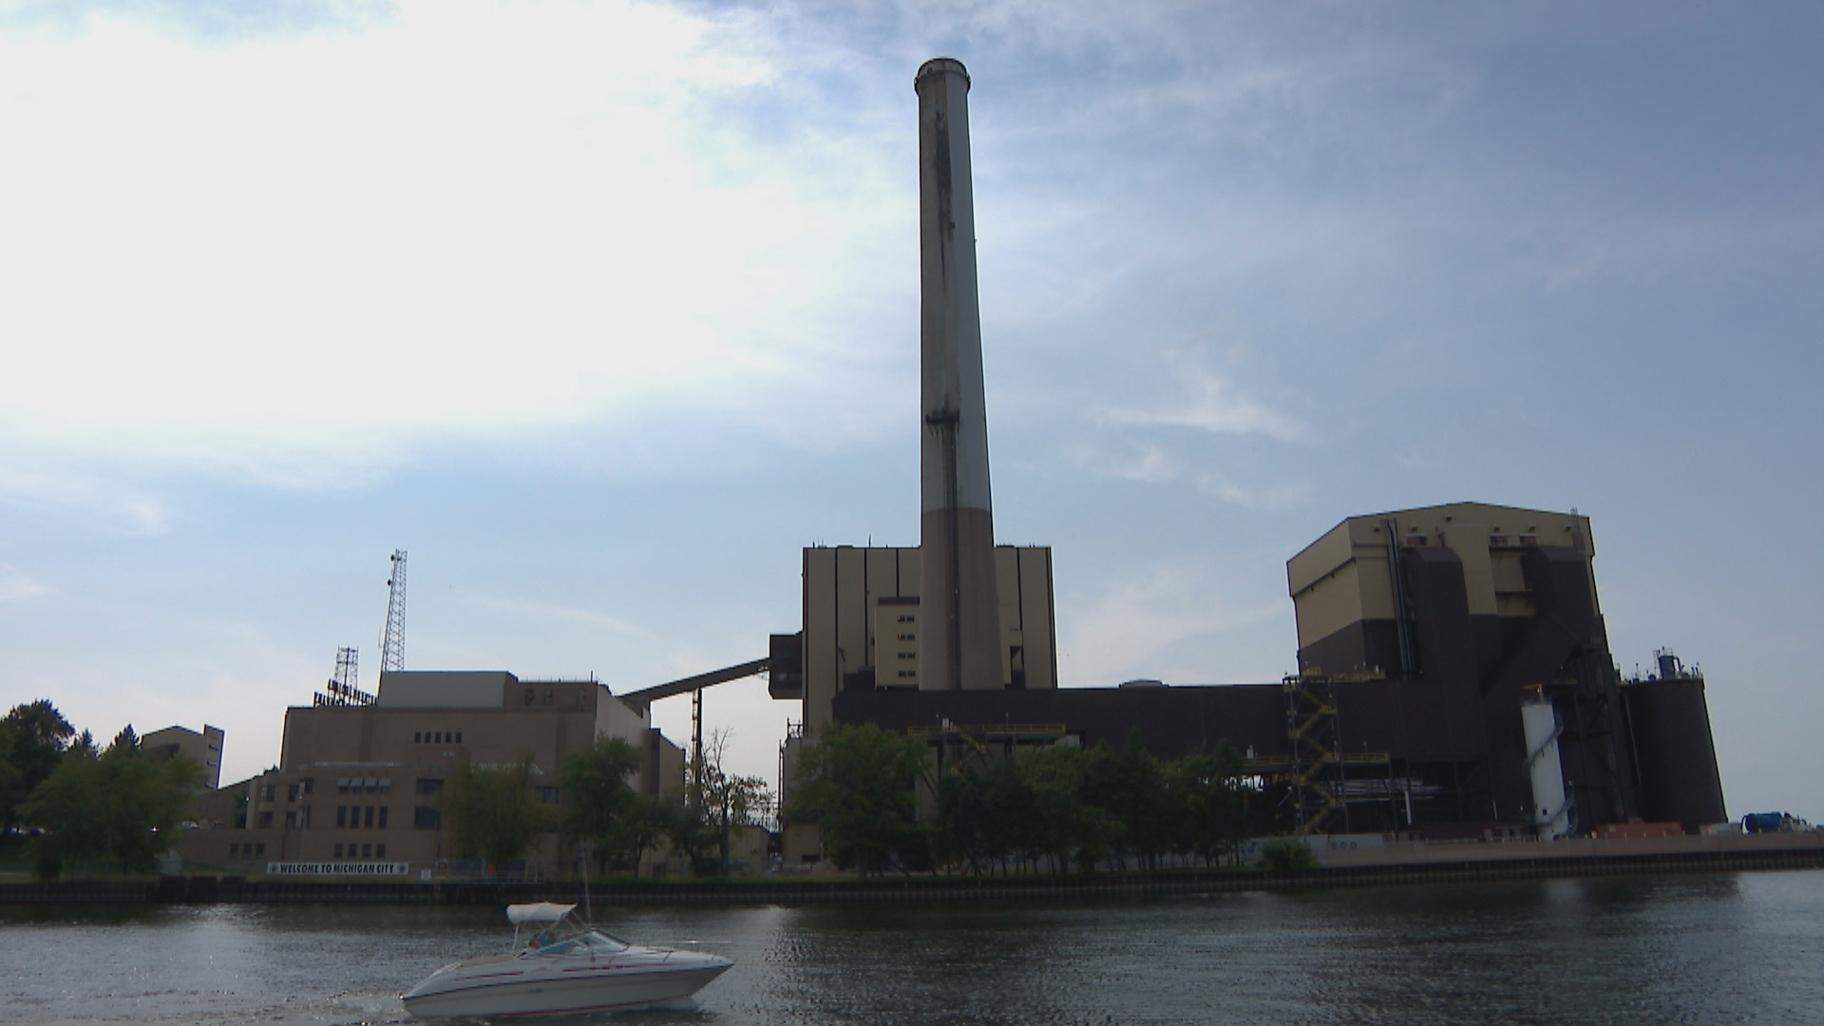 The Michigan City Generating Station has been burning coal for electricity for nearly a century. (WTTW News)